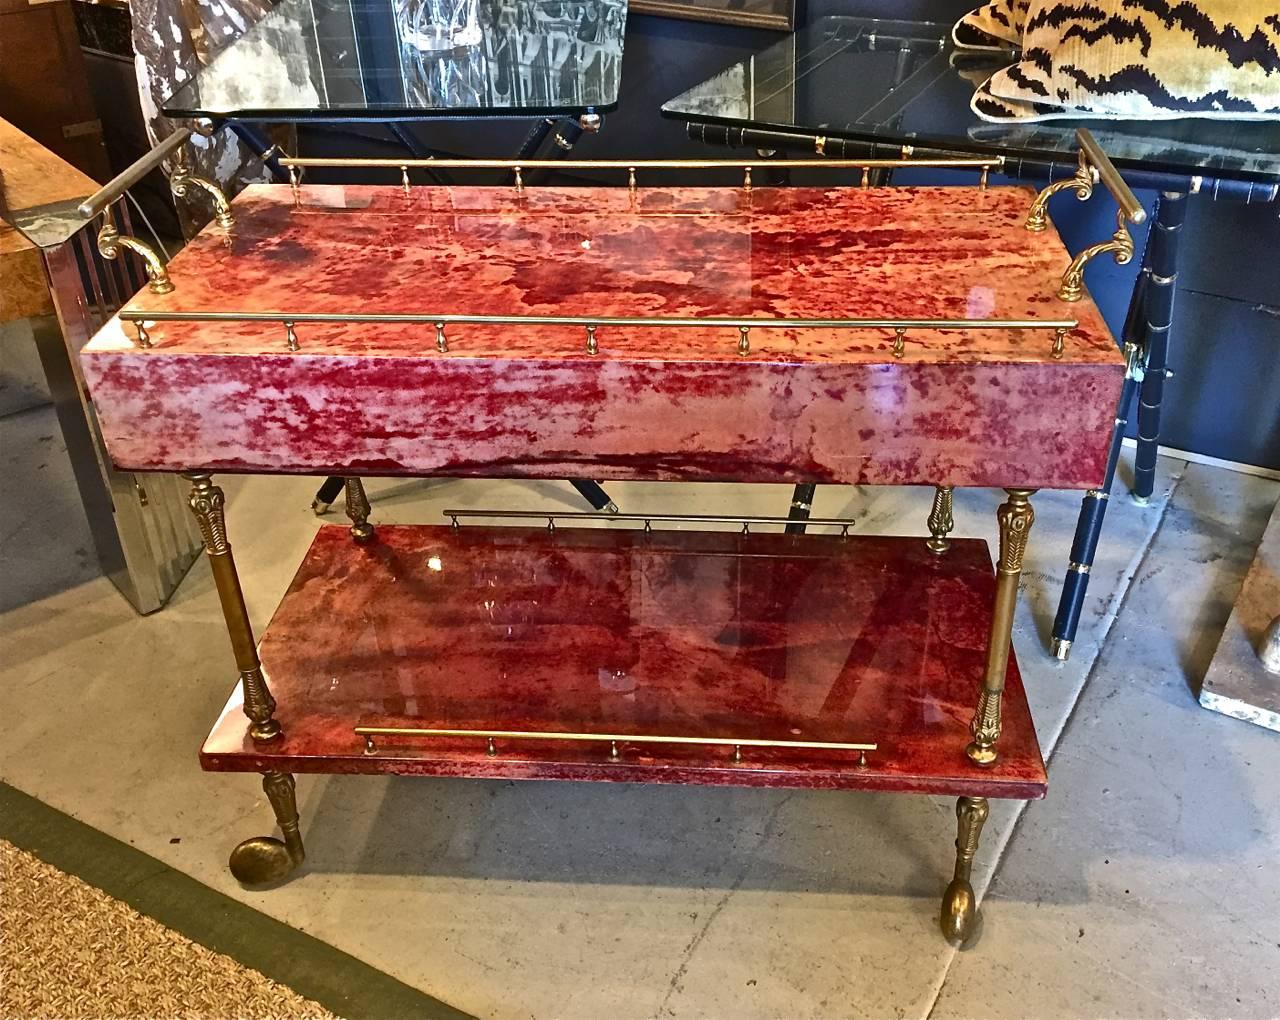 This is an outstanding example of the iconic Aldo Tura bar cart. The cart features an unusual and stunning red lacquered parchment (goatskin) surface. The two end drawers used to store bar essentials are also a unique feature. The cart is in overall